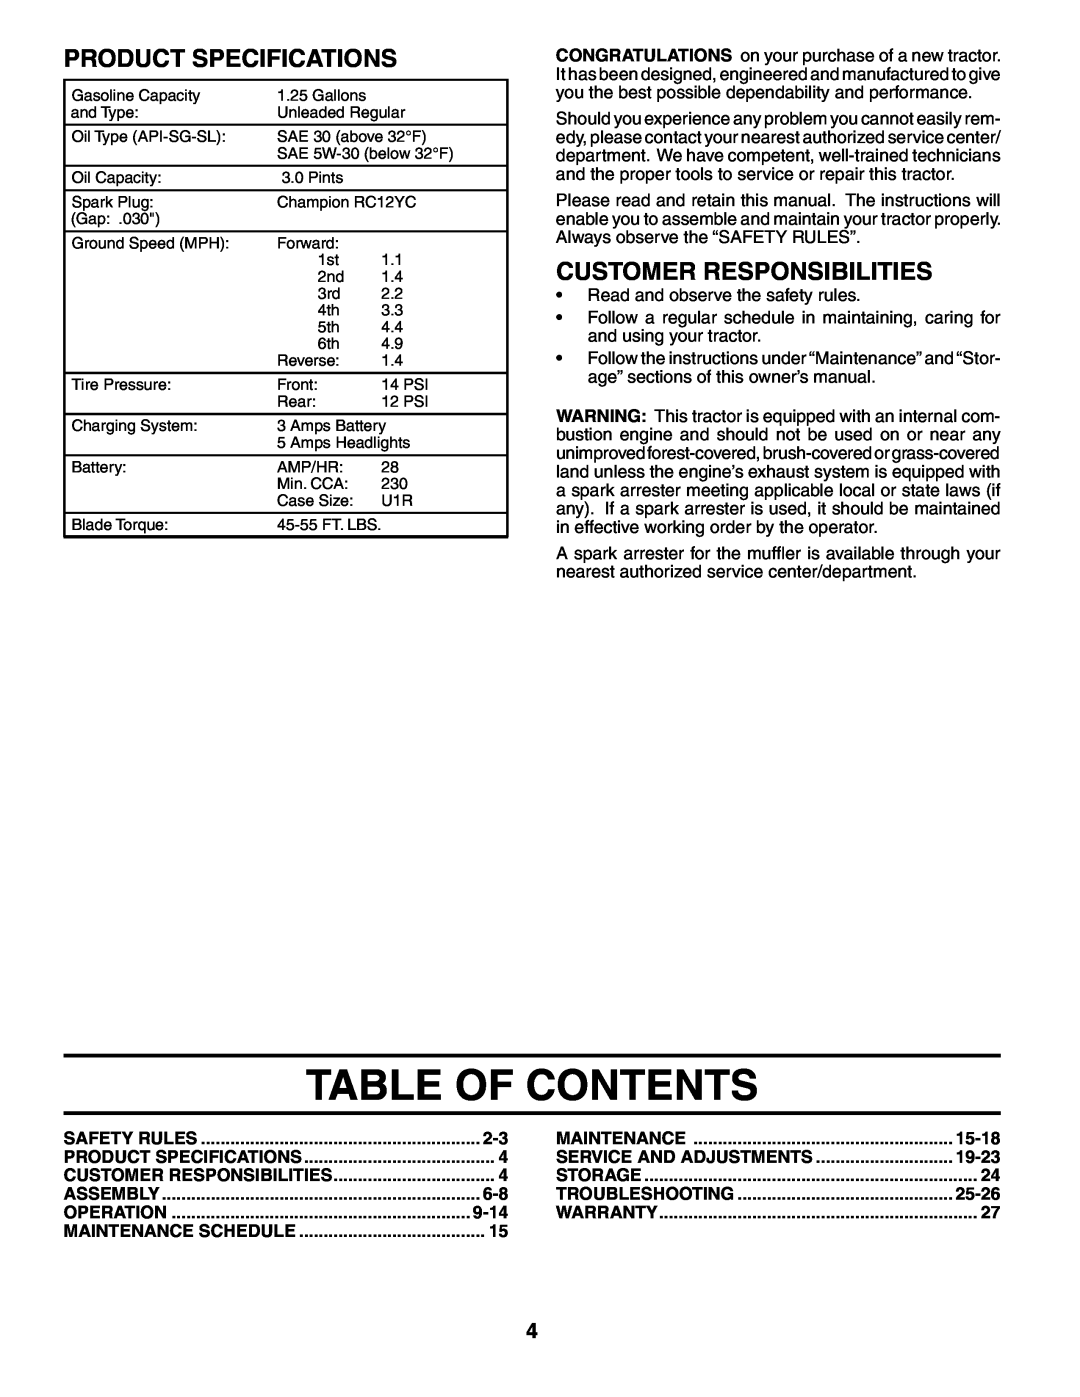 Poulan PB1638LT manual Table Of Contents, Product Specifications, Customer Responsibilities, 9-14, 15-18, 19-23, 25-26 